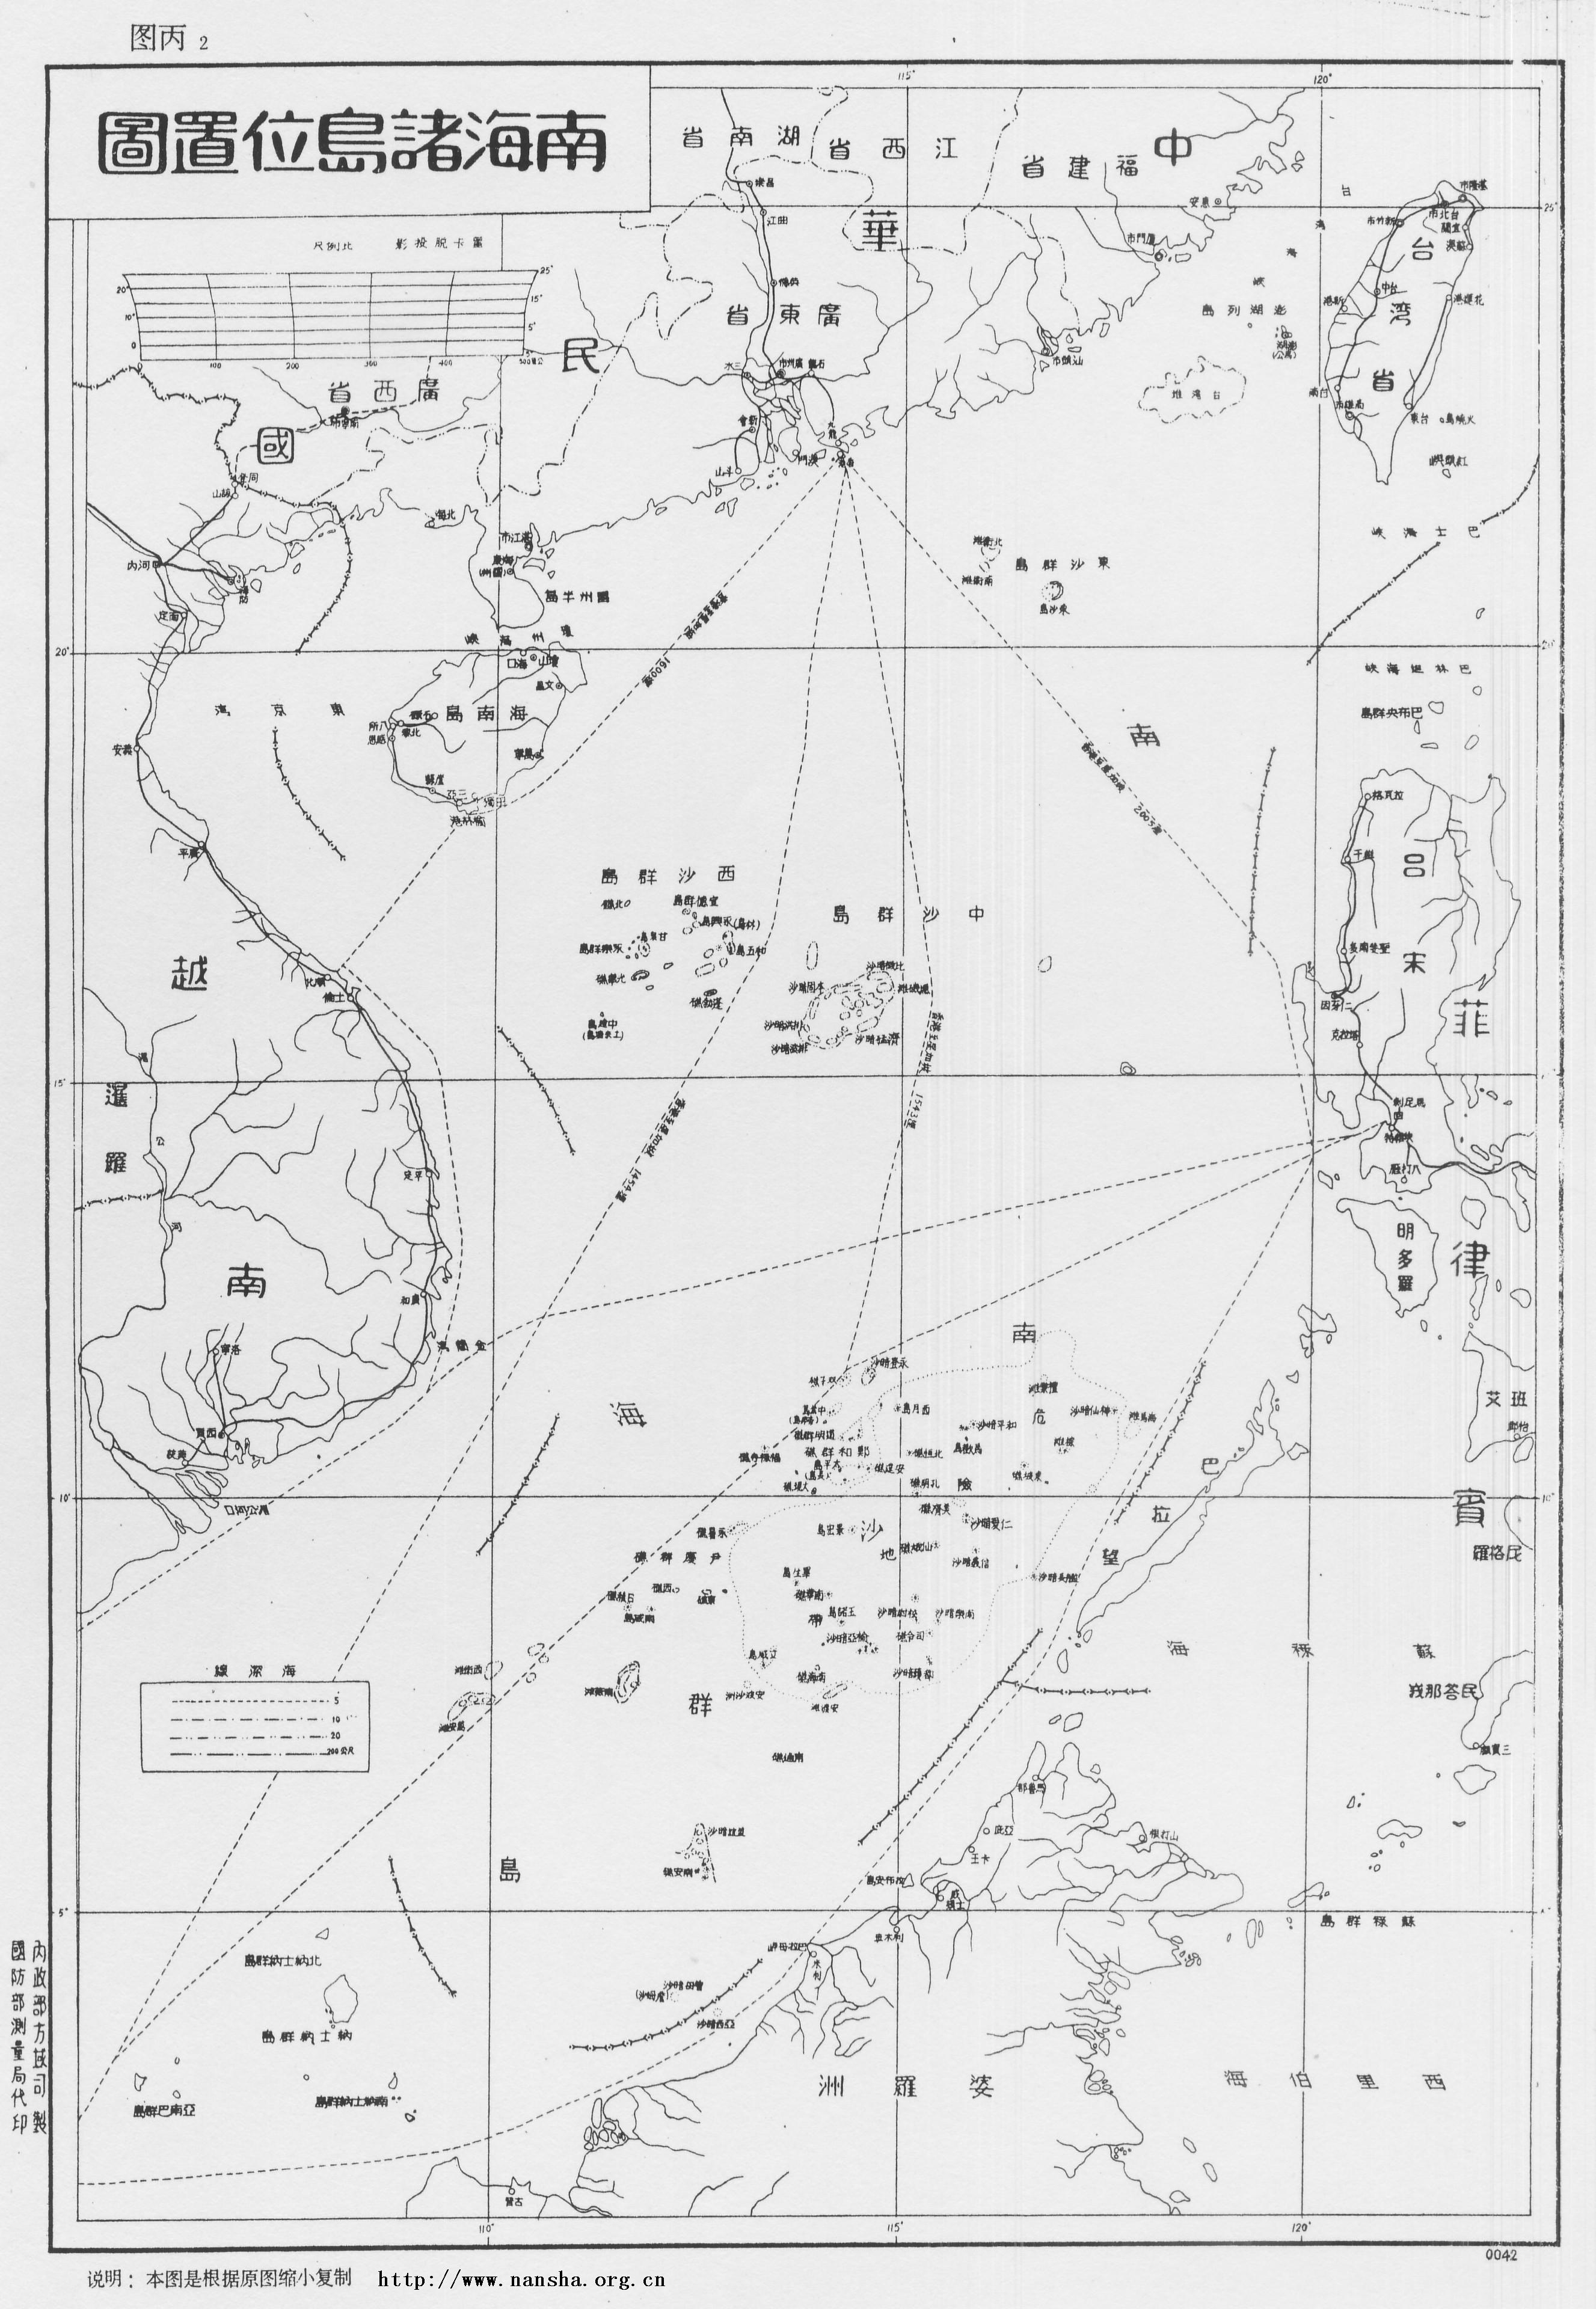 A 1947 map of China's maritime claims.